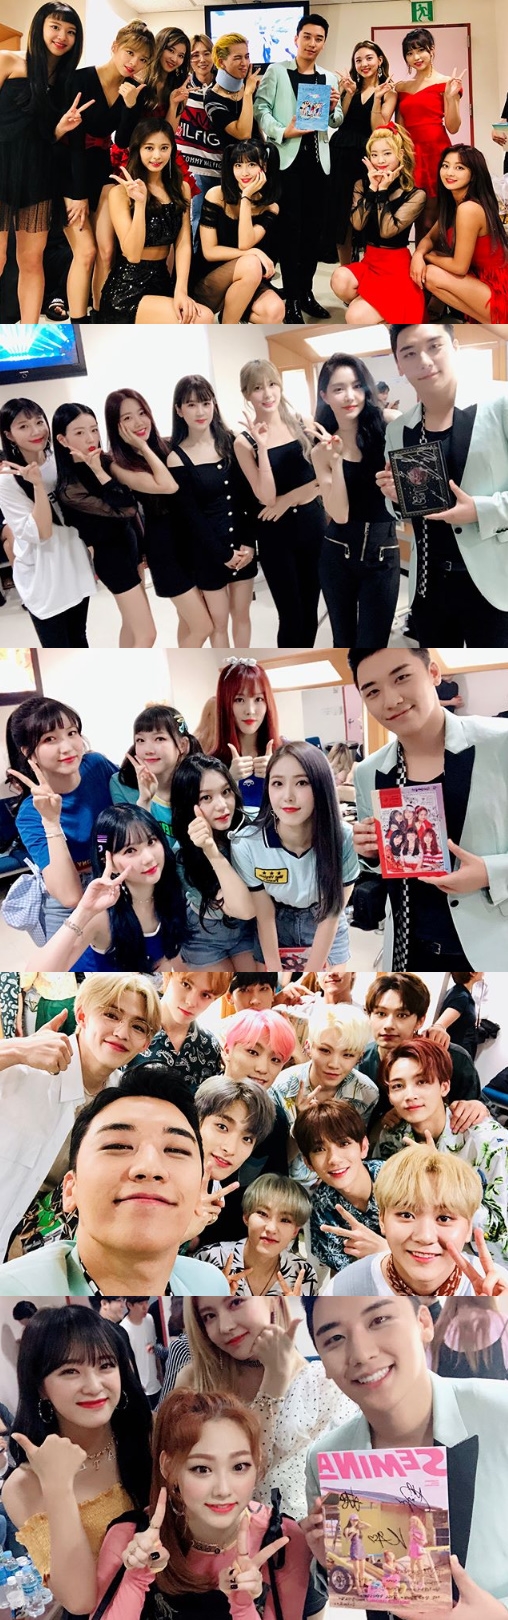 Singer Victory is being supported by many juniors as he acts as Set Seltenie.Victory posted a picture on his SNS on the morning of the 26th, The singers who are currently active cheered us up # TWICE #twice #apink #Apink #Gugudan #GFriend #girlfriend #Seventeen #eventeen.Victory in the photo is making a happy face with albums such as TWICE, Apink, and Gugudan.Victory released Solo album Great Victory in five years on the 20th and actively participatedvictorious SNS